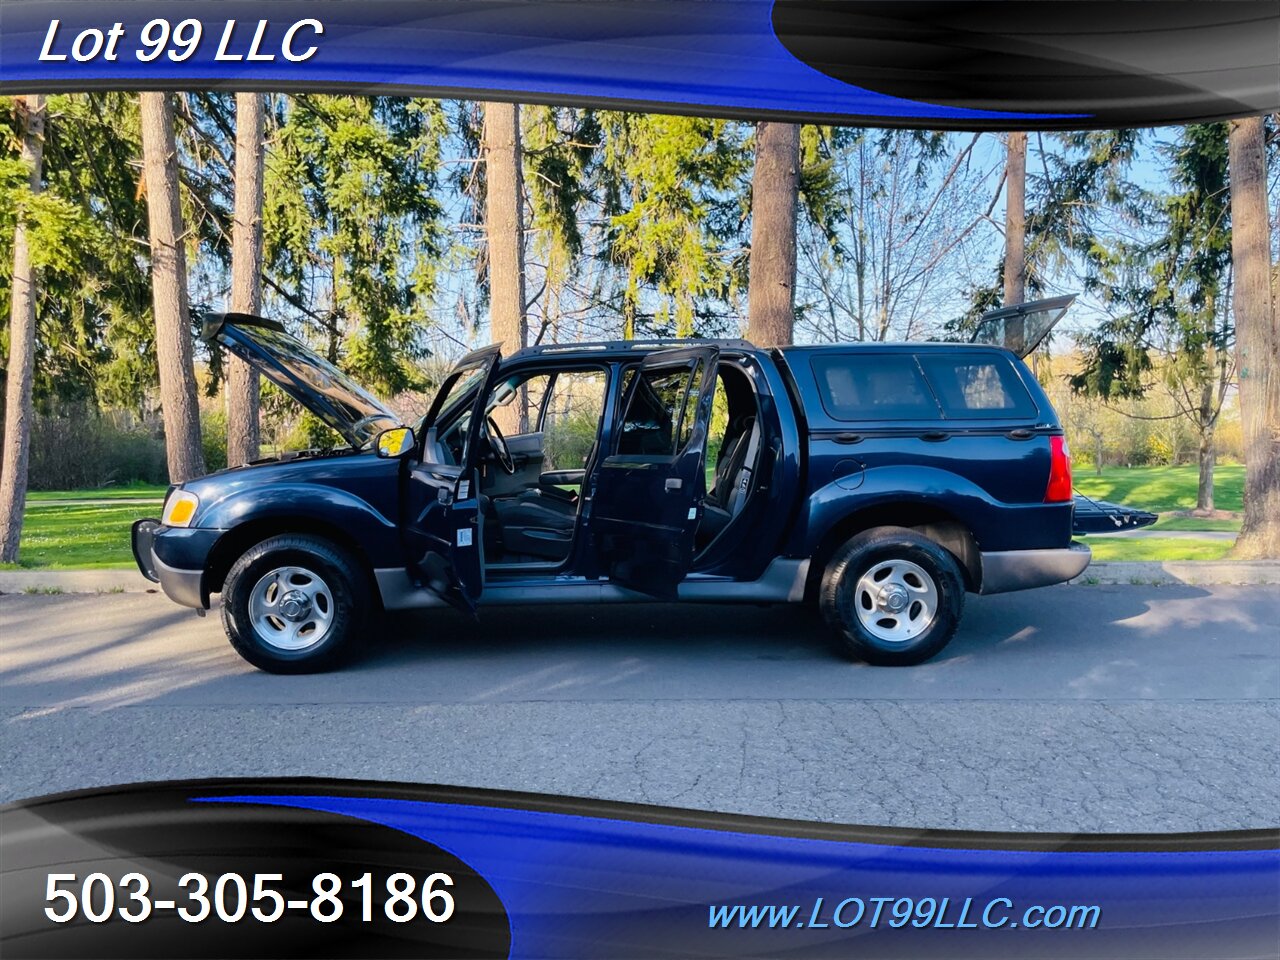 2003 Ford Explorer Sport Trac XLS 4x4  1-OWNER 117k  NEW TIRES  Canopy   - Photo 37 - Milwaukie, OR 97267